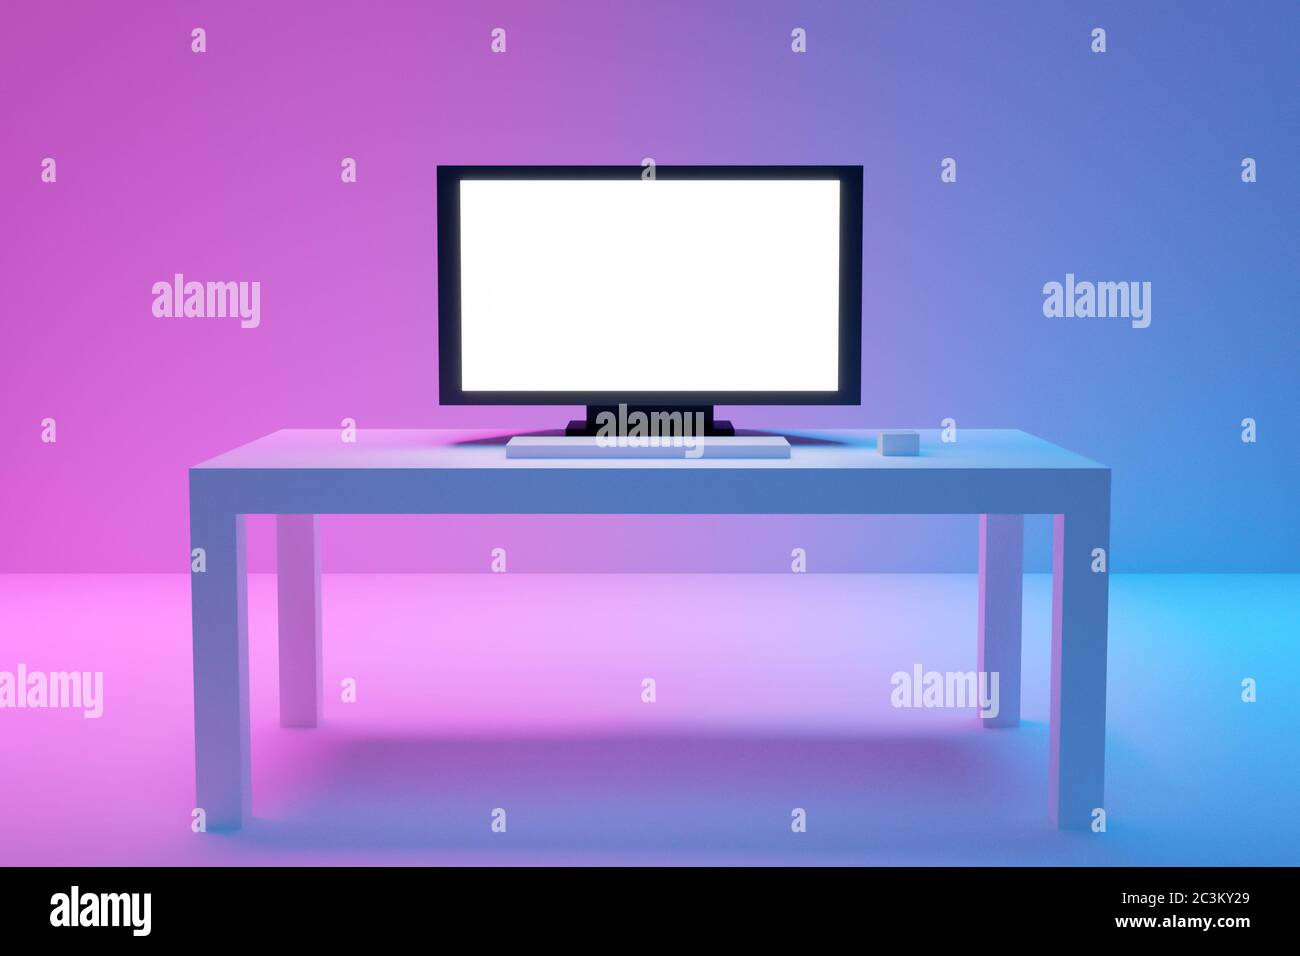 3d illustration of a large flat tv stands on a white coffee table on a blue-pink background. A place for home relaxation Stock Photo